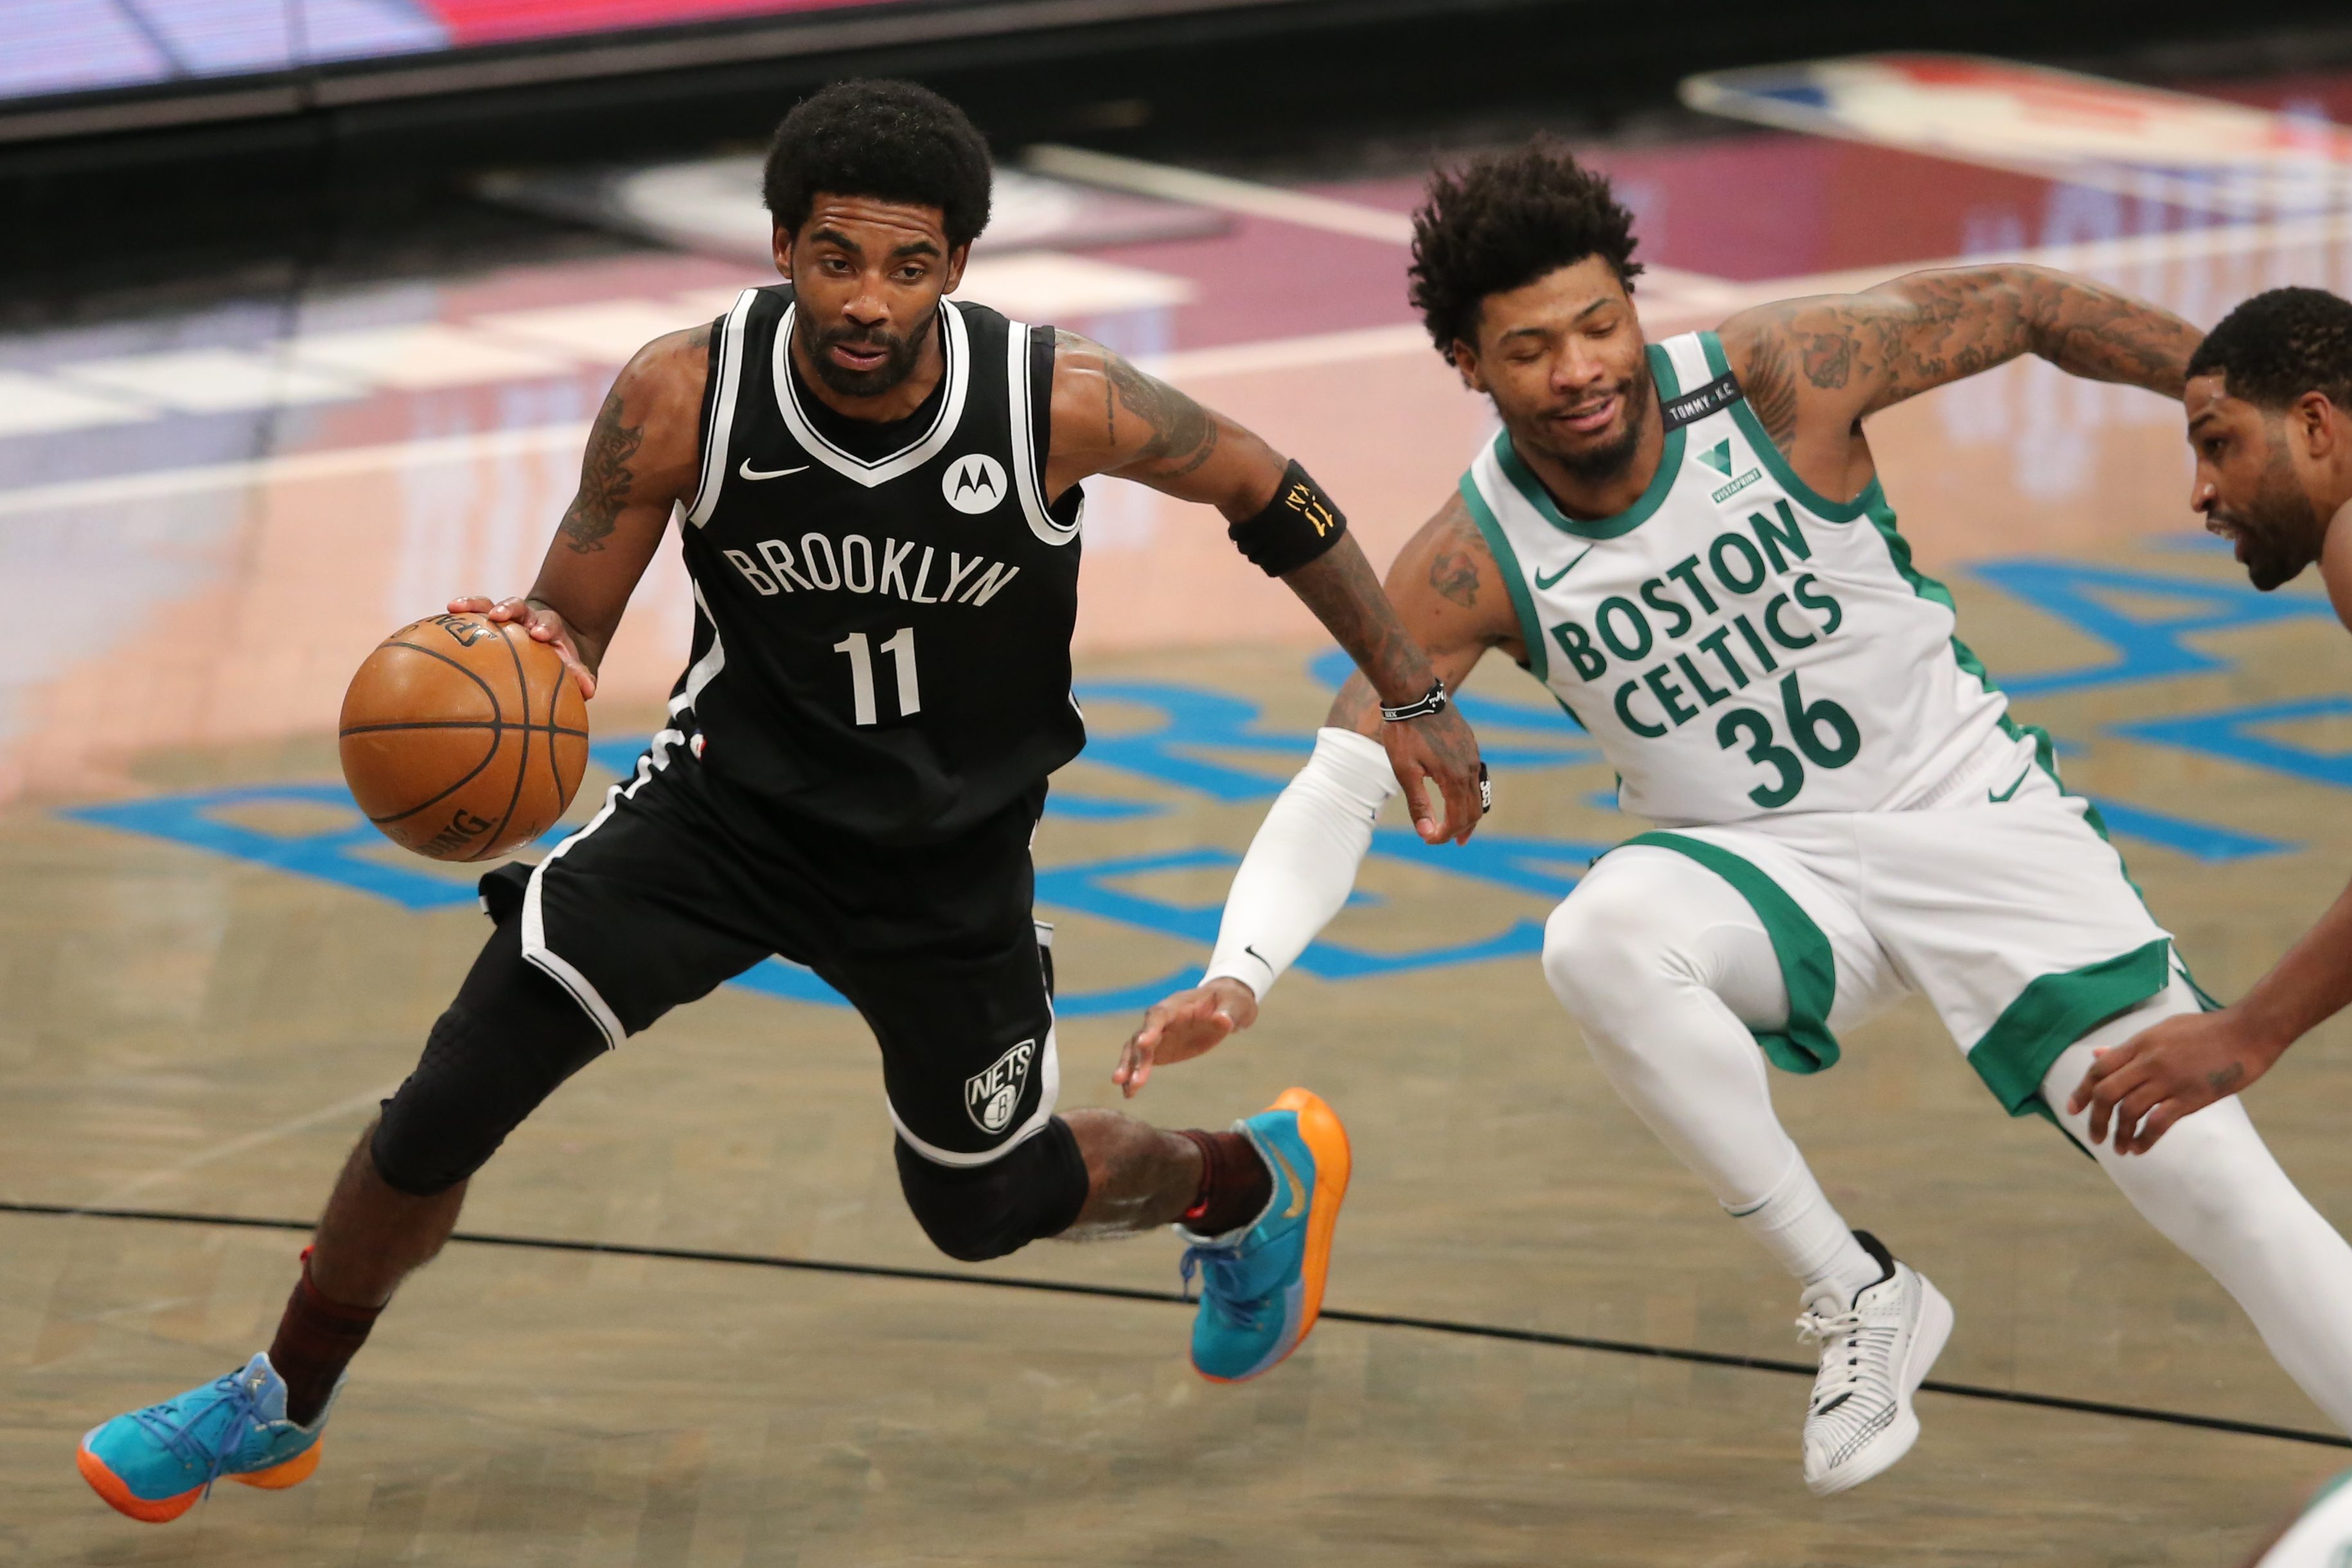 NBA Playoffs 2021 preview: East matchups filled with intrigue